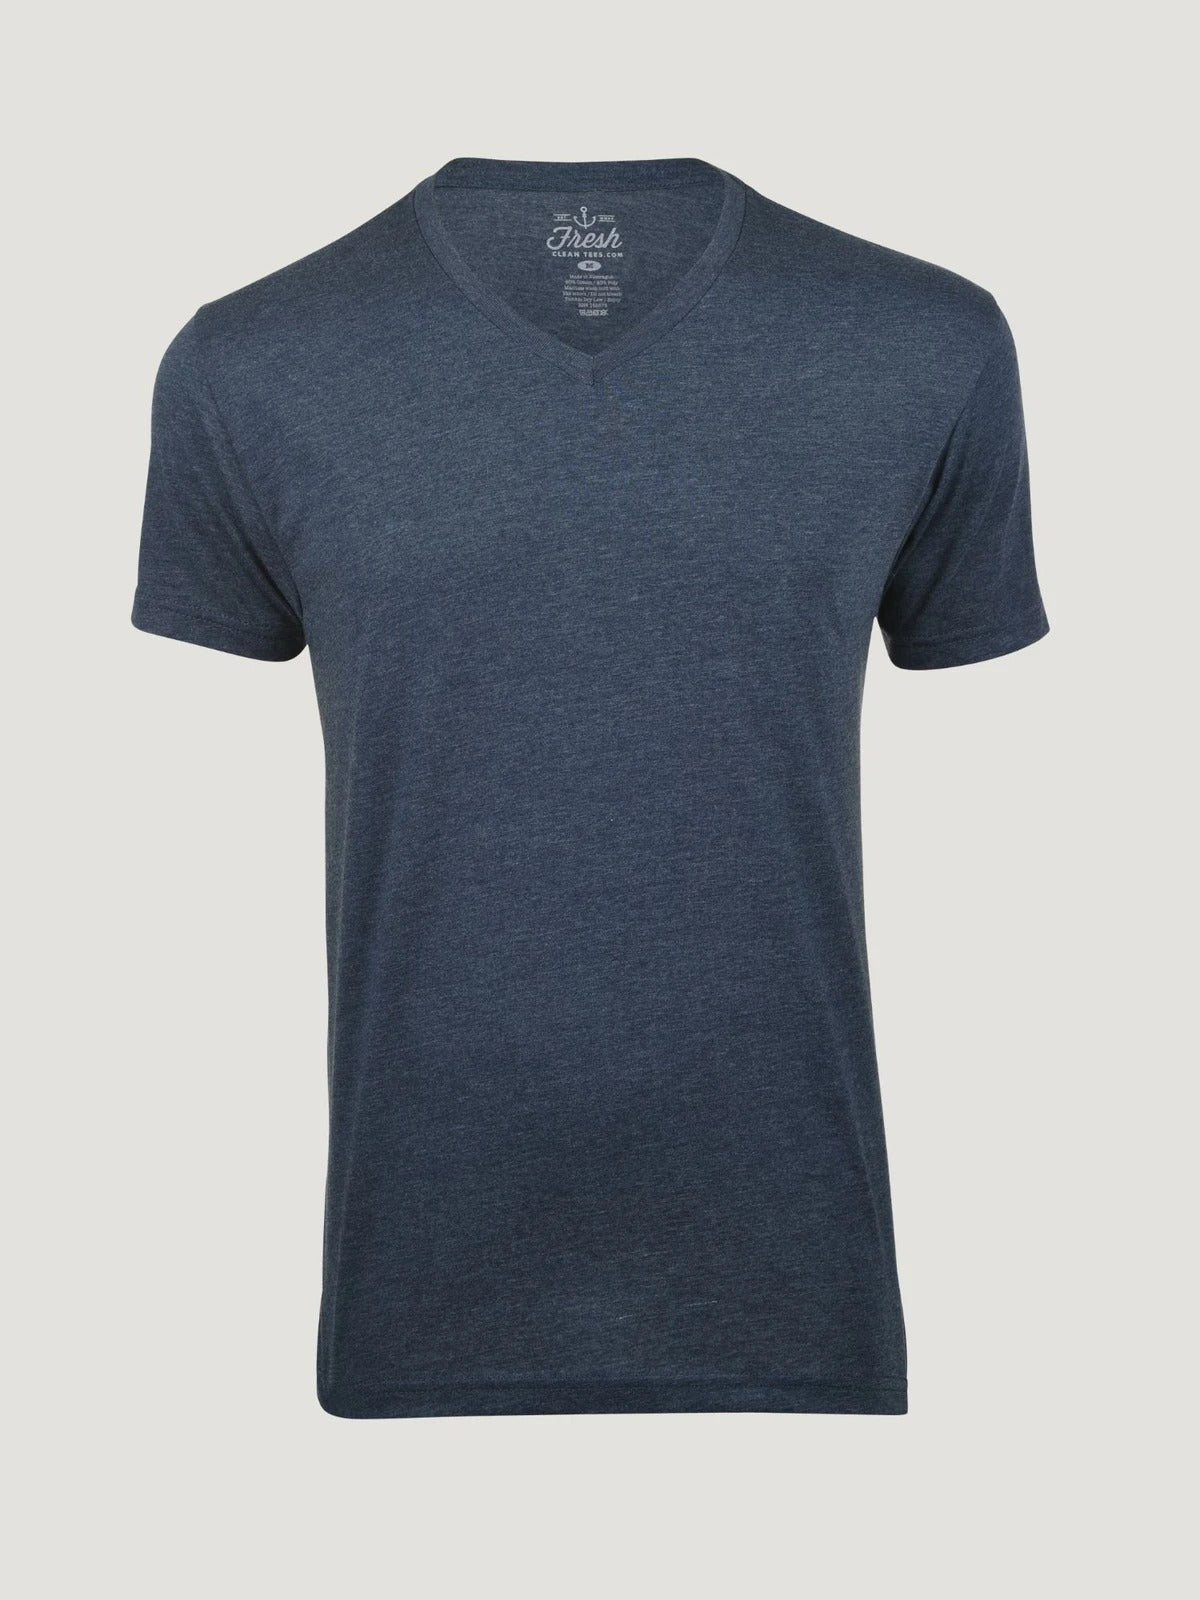 The 12 Best V-Neck T-Shirts to Buy Now